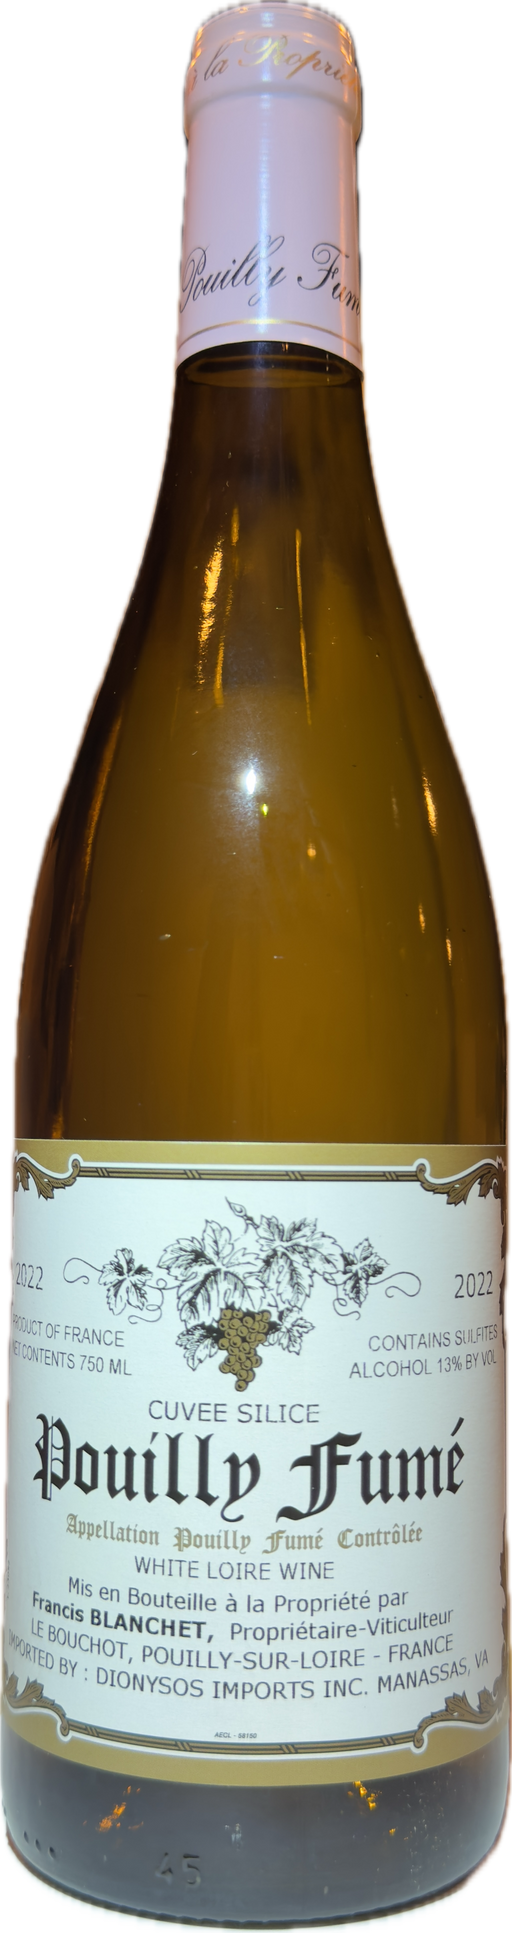 F. blanchet Pouilly-fume cuvee silice 2022